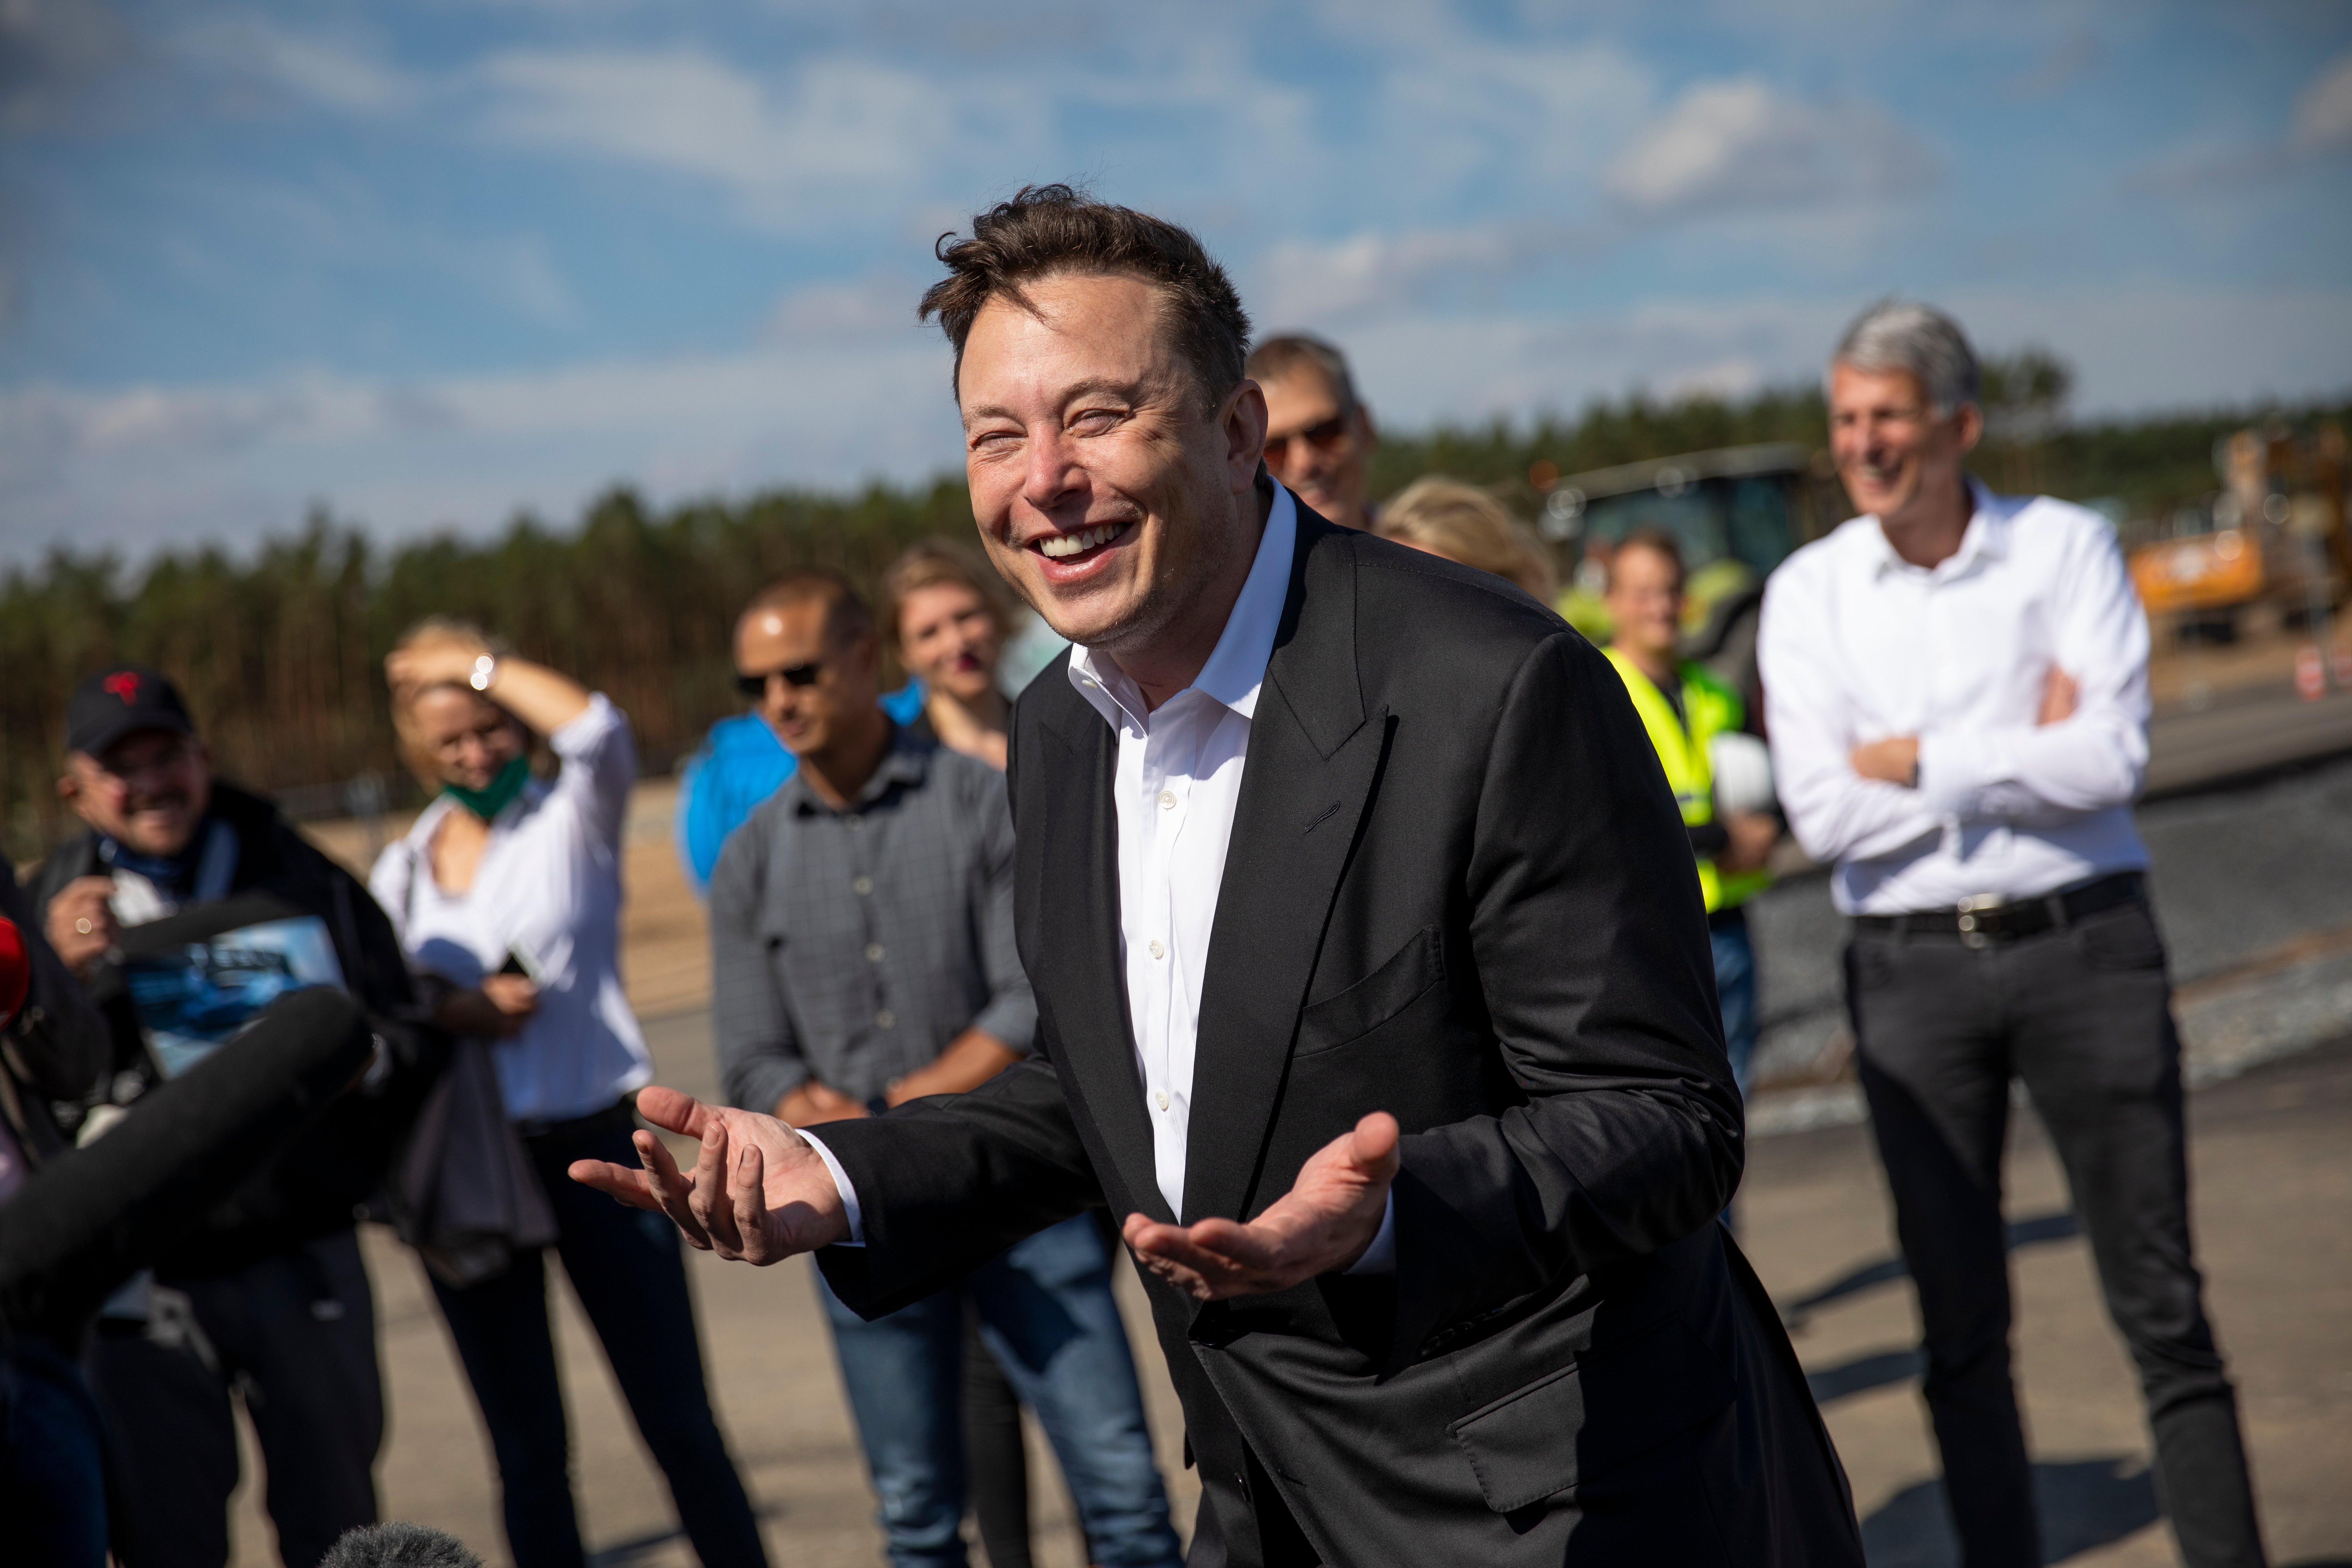 Elon Musk has become the third-richest American thanks to a recent surge in share prices